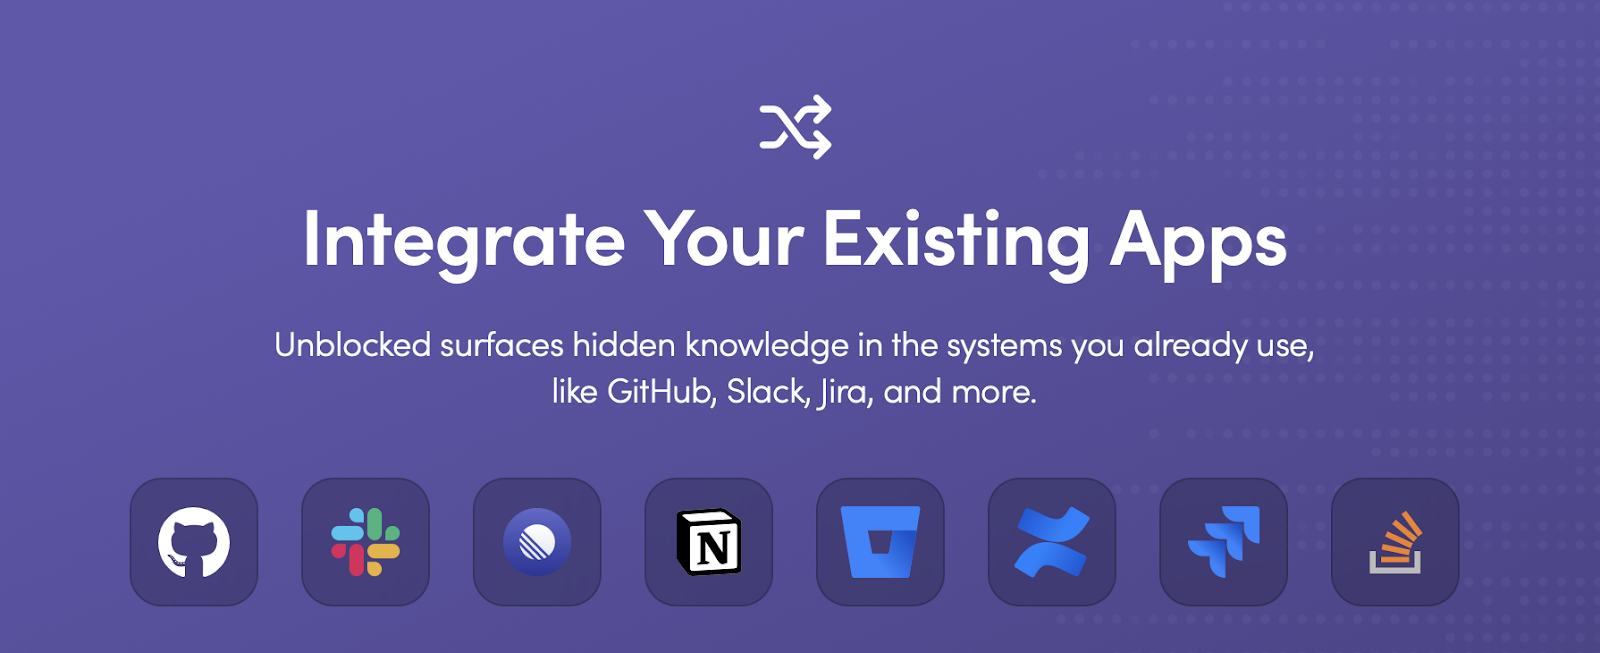 Integrate your existing apps into Unblocked